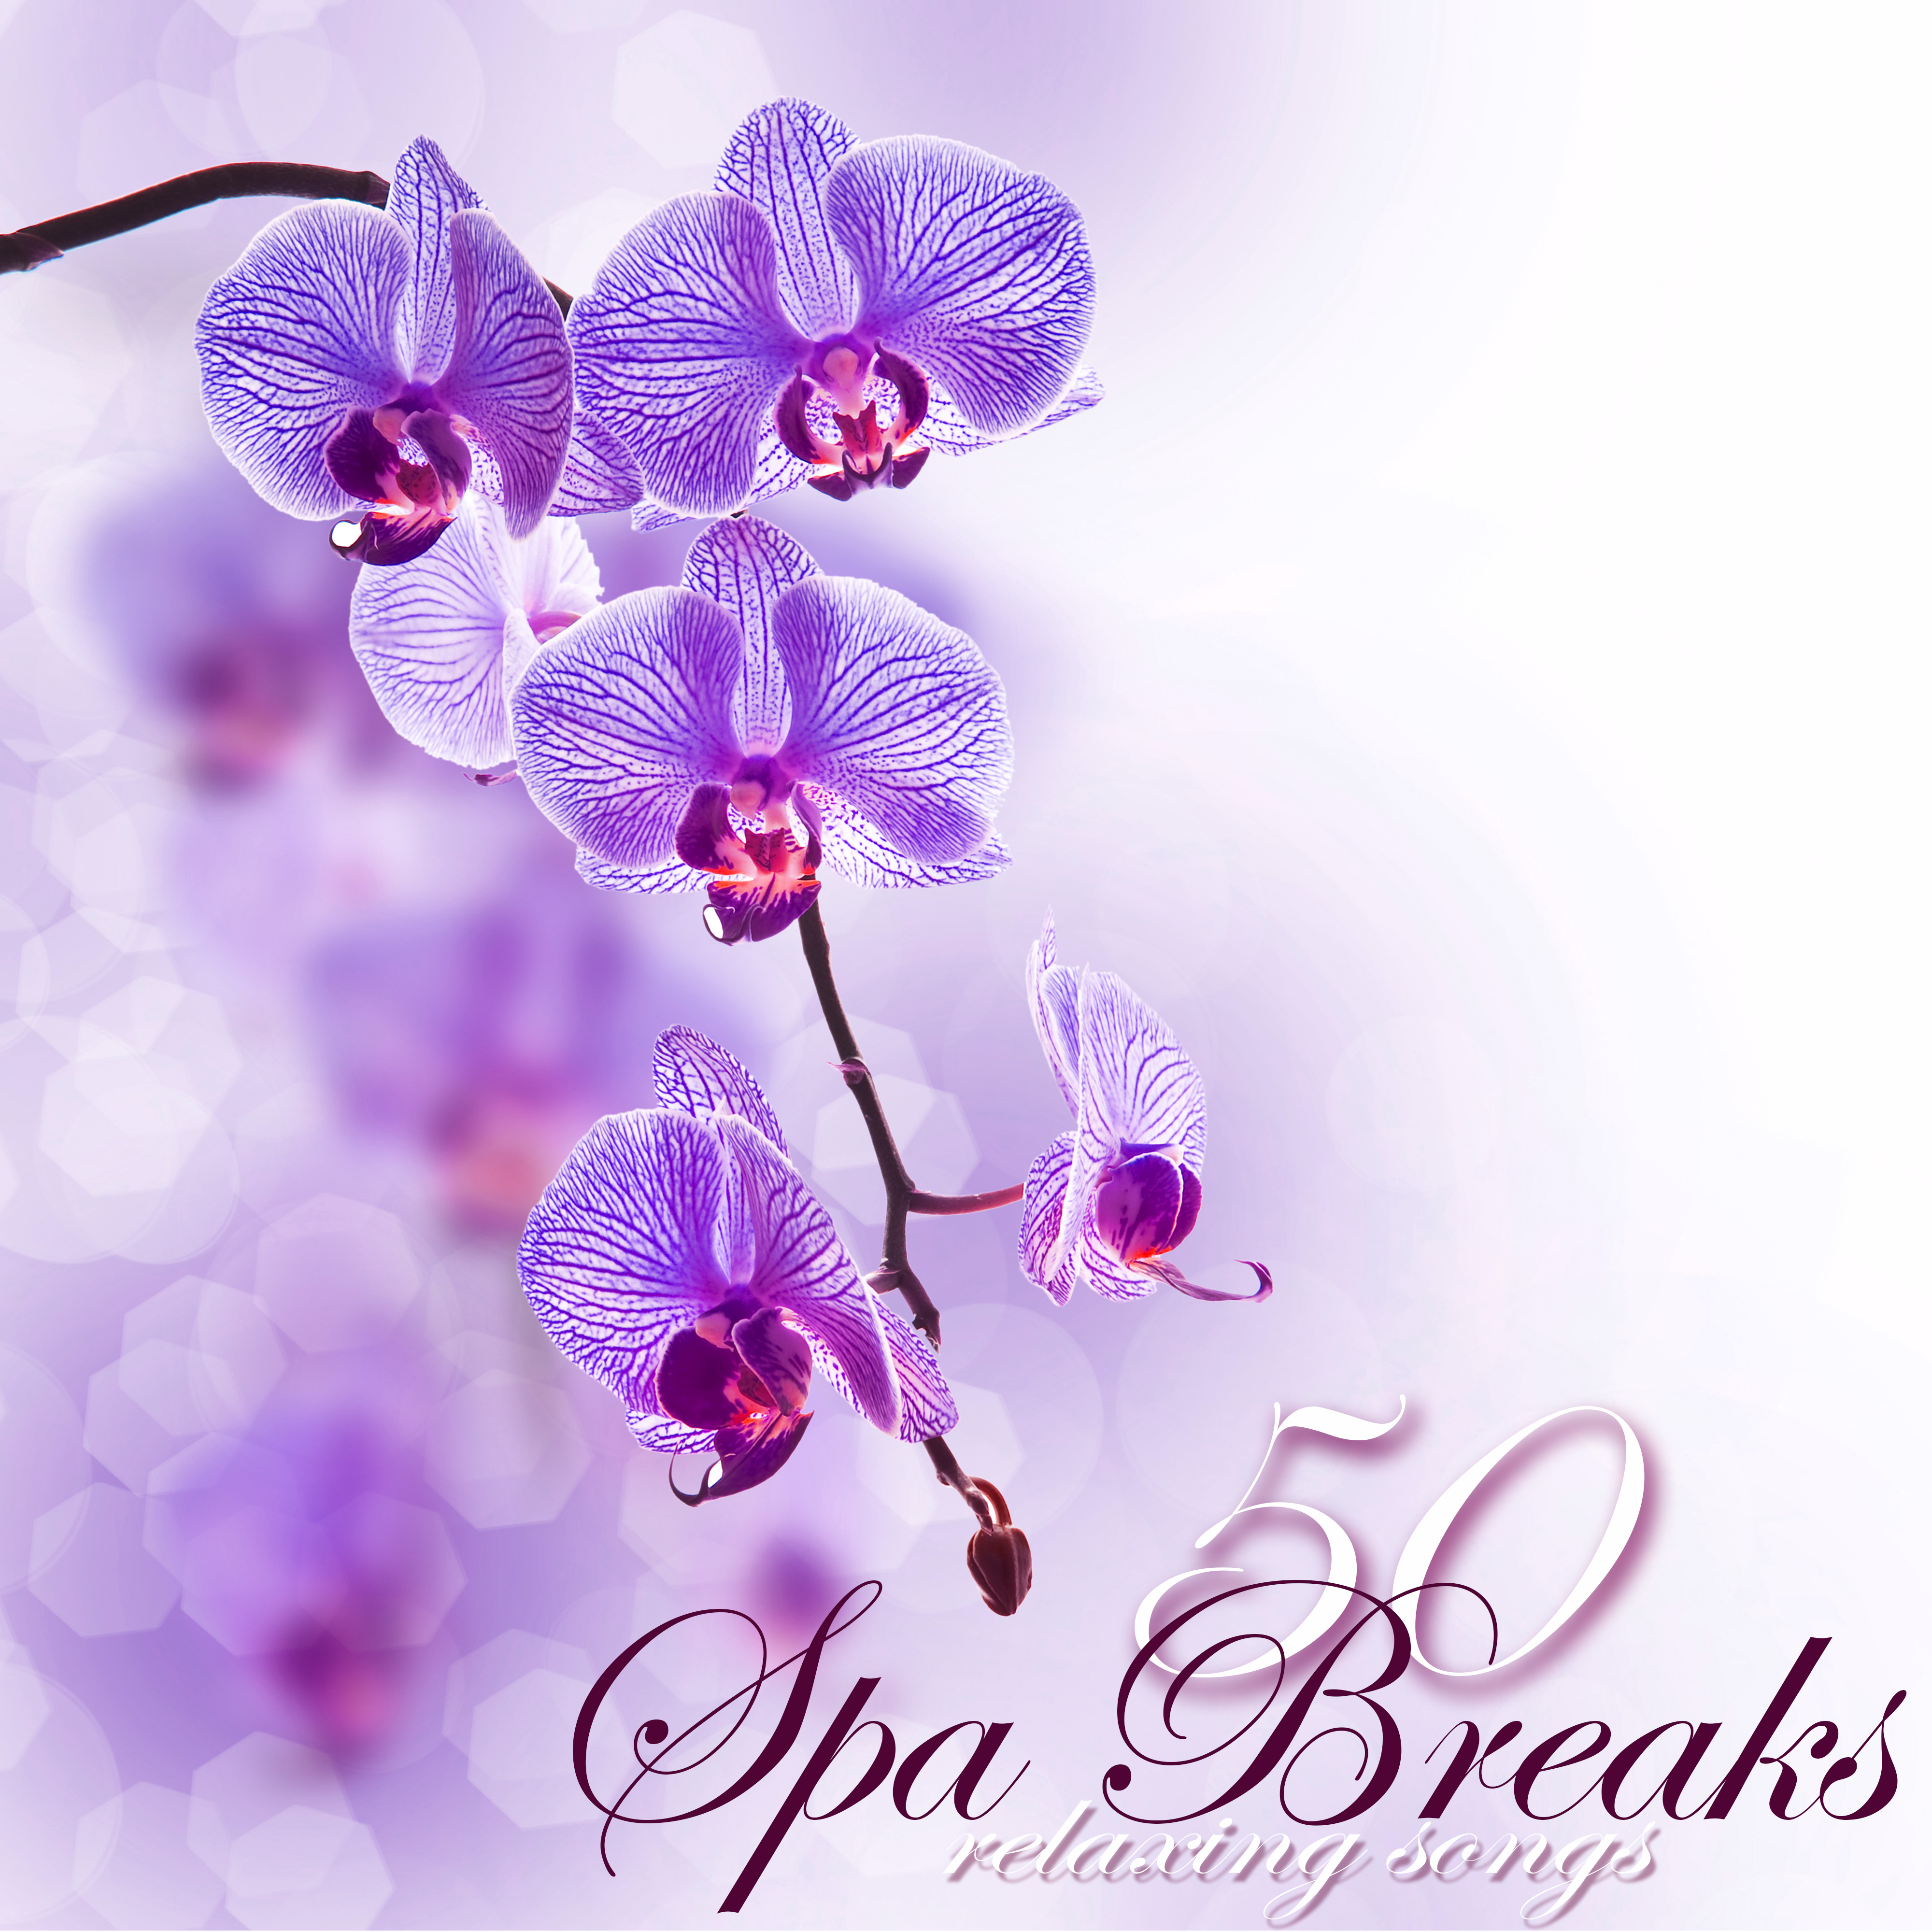 Spa Breaks 50 Relaxing Songs  Fifty Quiet Moments of Relaxation under Bamboo Shades in Your Zen Room, Emotional Peaceful Songs for Spa Day